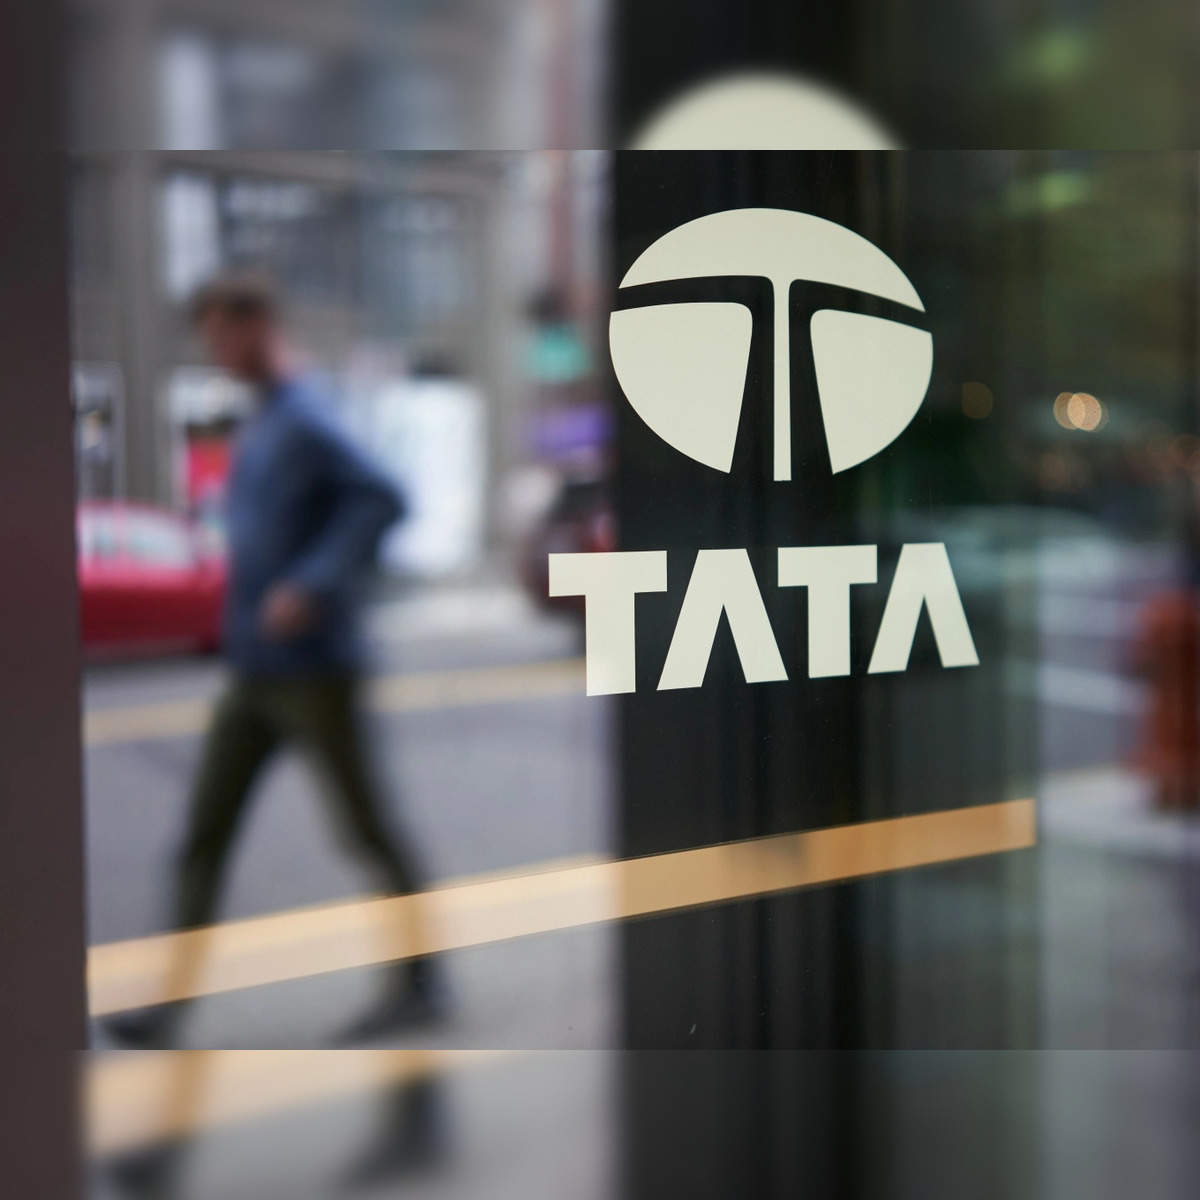 tata: Tata to open 20 'beauty tech' outlets, in talks with foreign brands